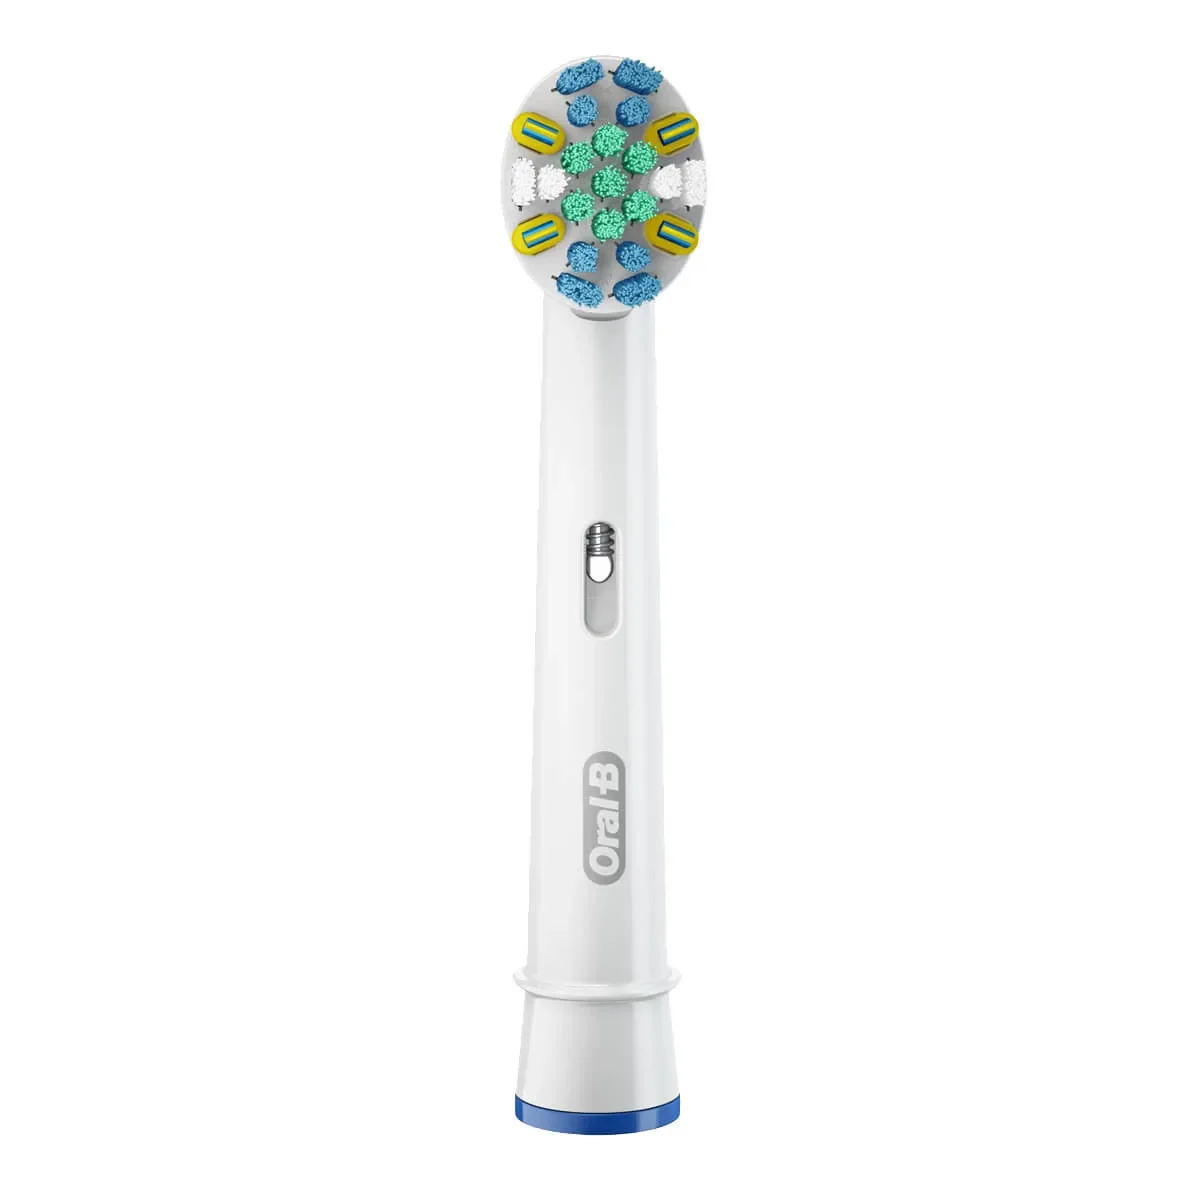 Oral-B FlossAction toothbrush head 